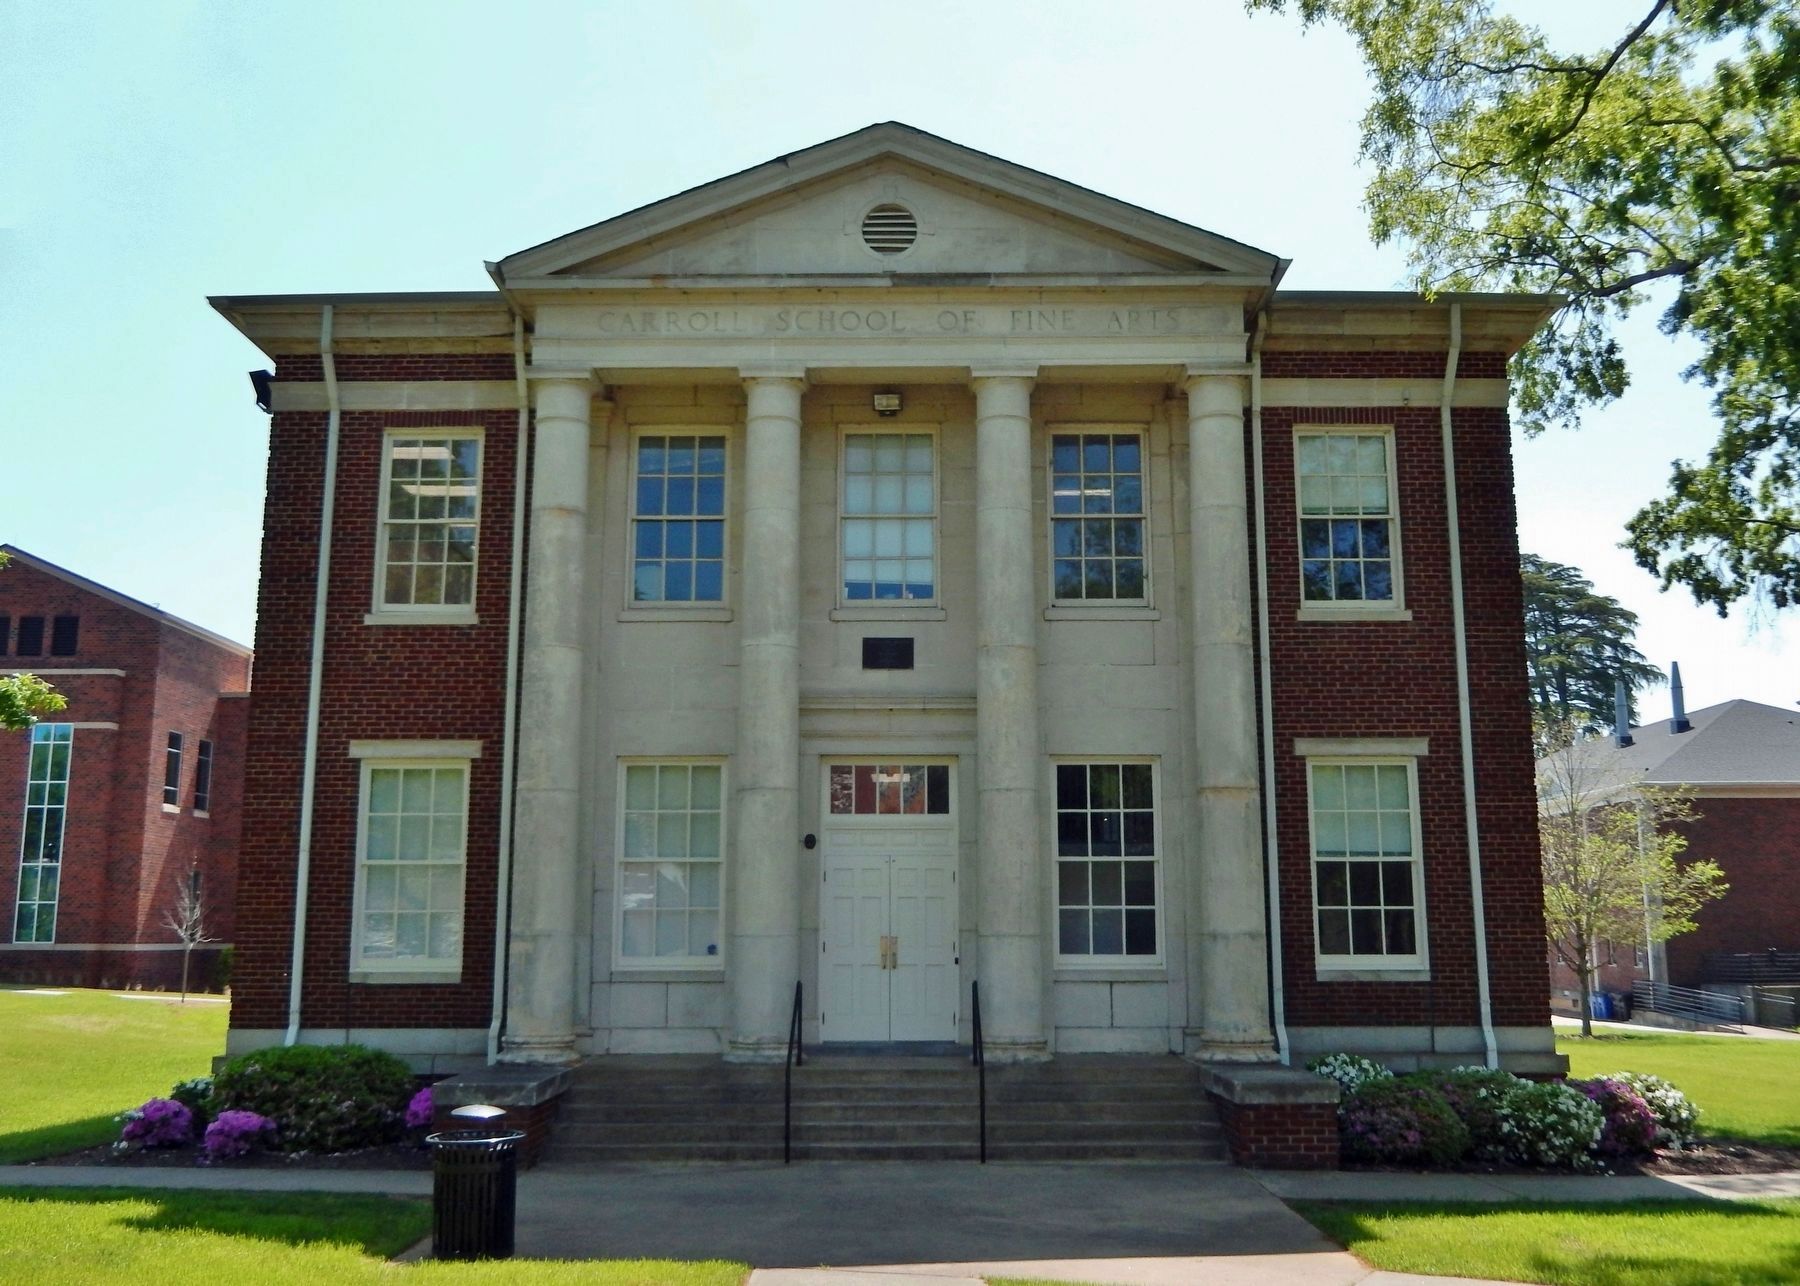 Carroll School of Fine Arts Building (<i>west/front elevation</i>) image. Click for full size.